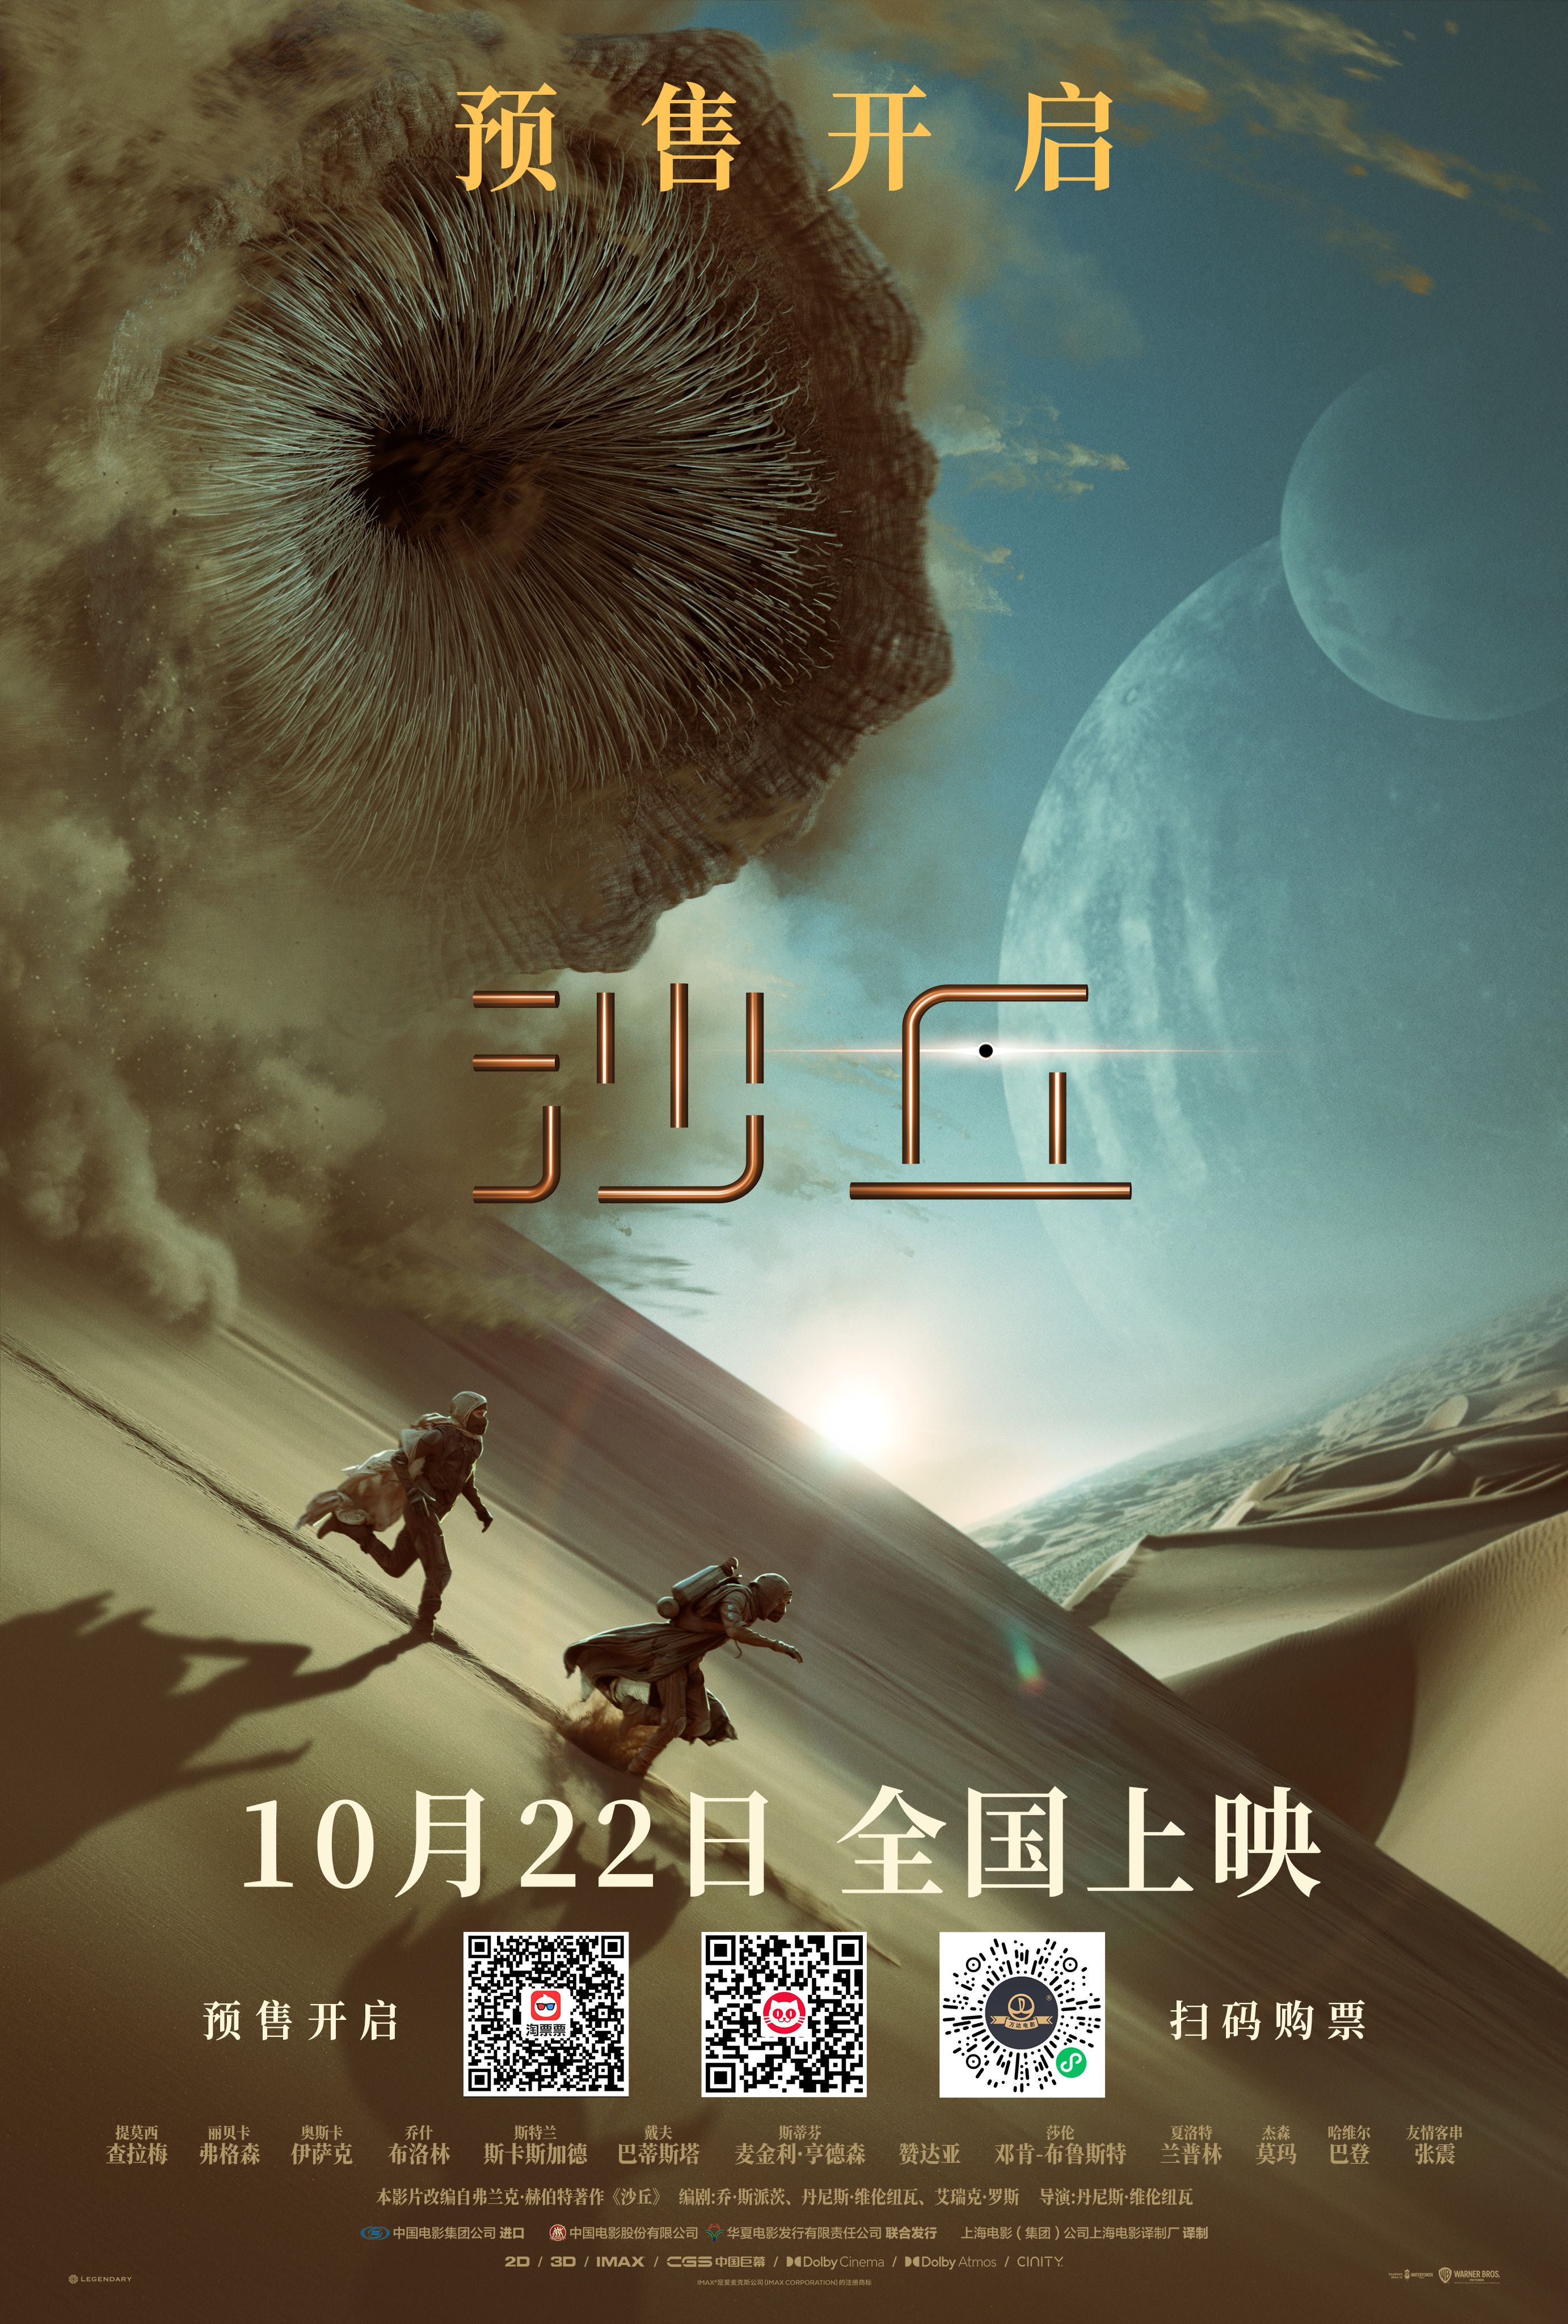 Chinese giant sandworm Dune poster